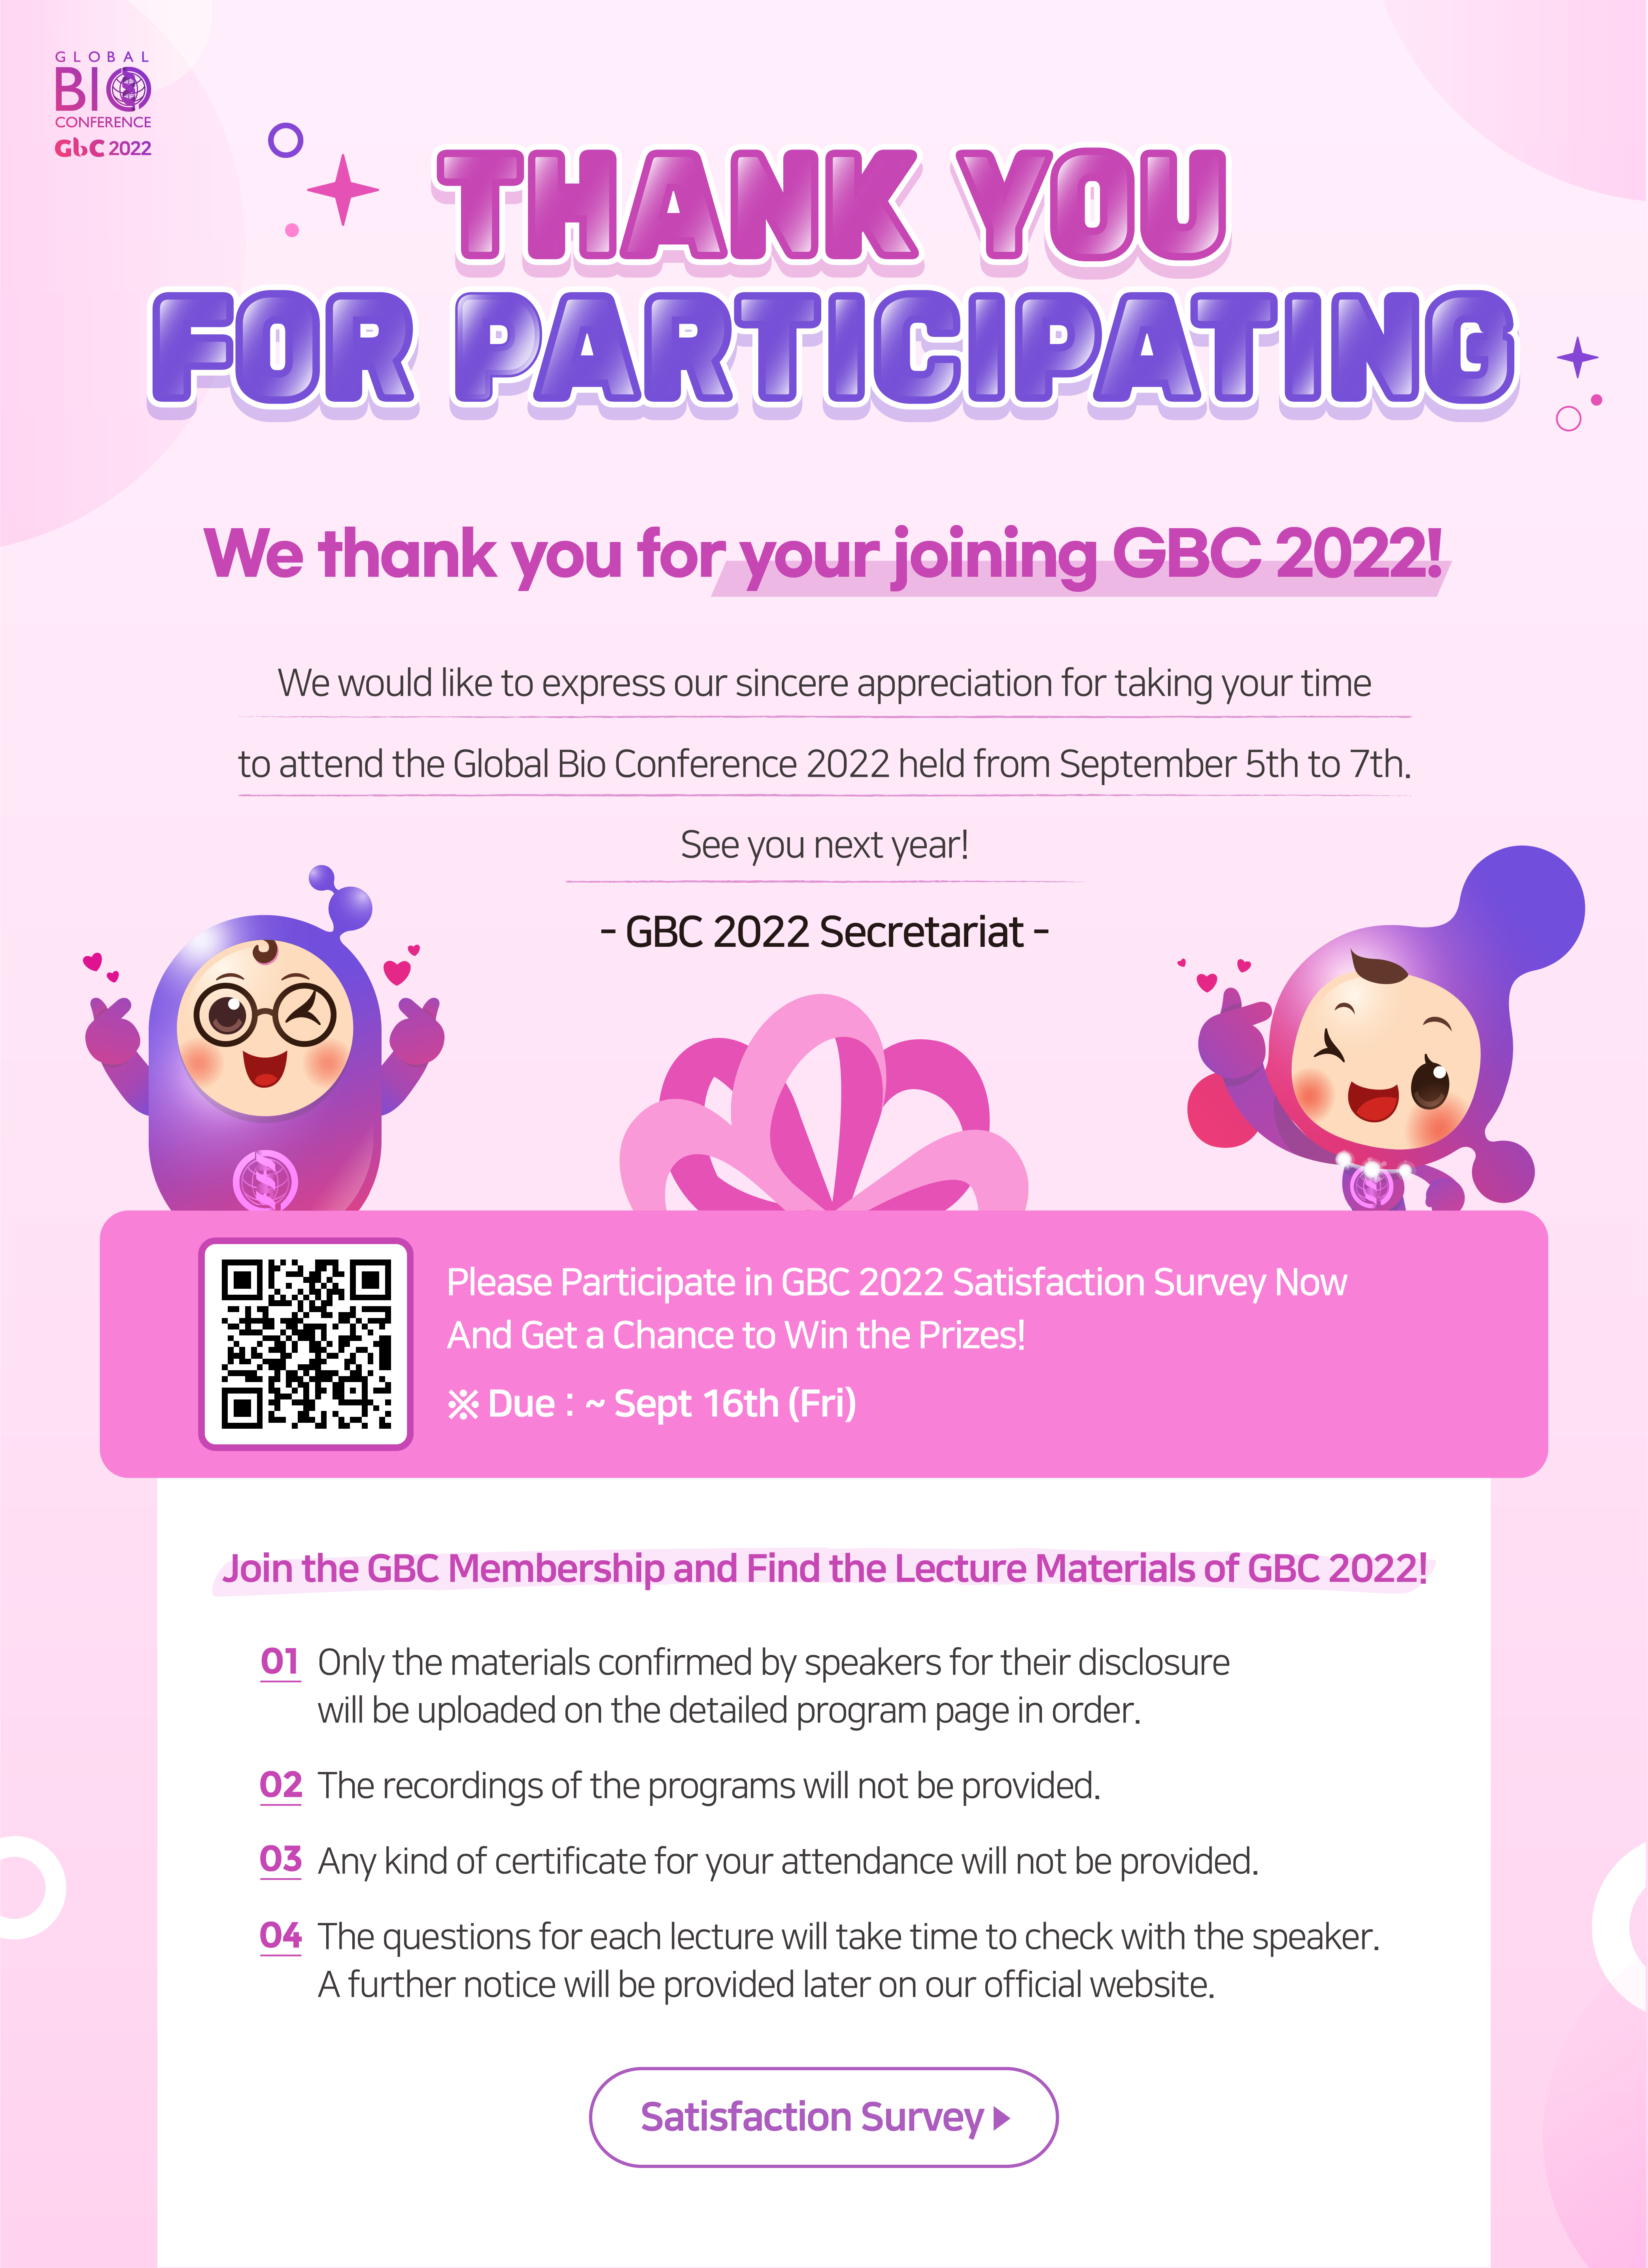 GBC2022_Thank%20you%20letter_engr_0902-02.png